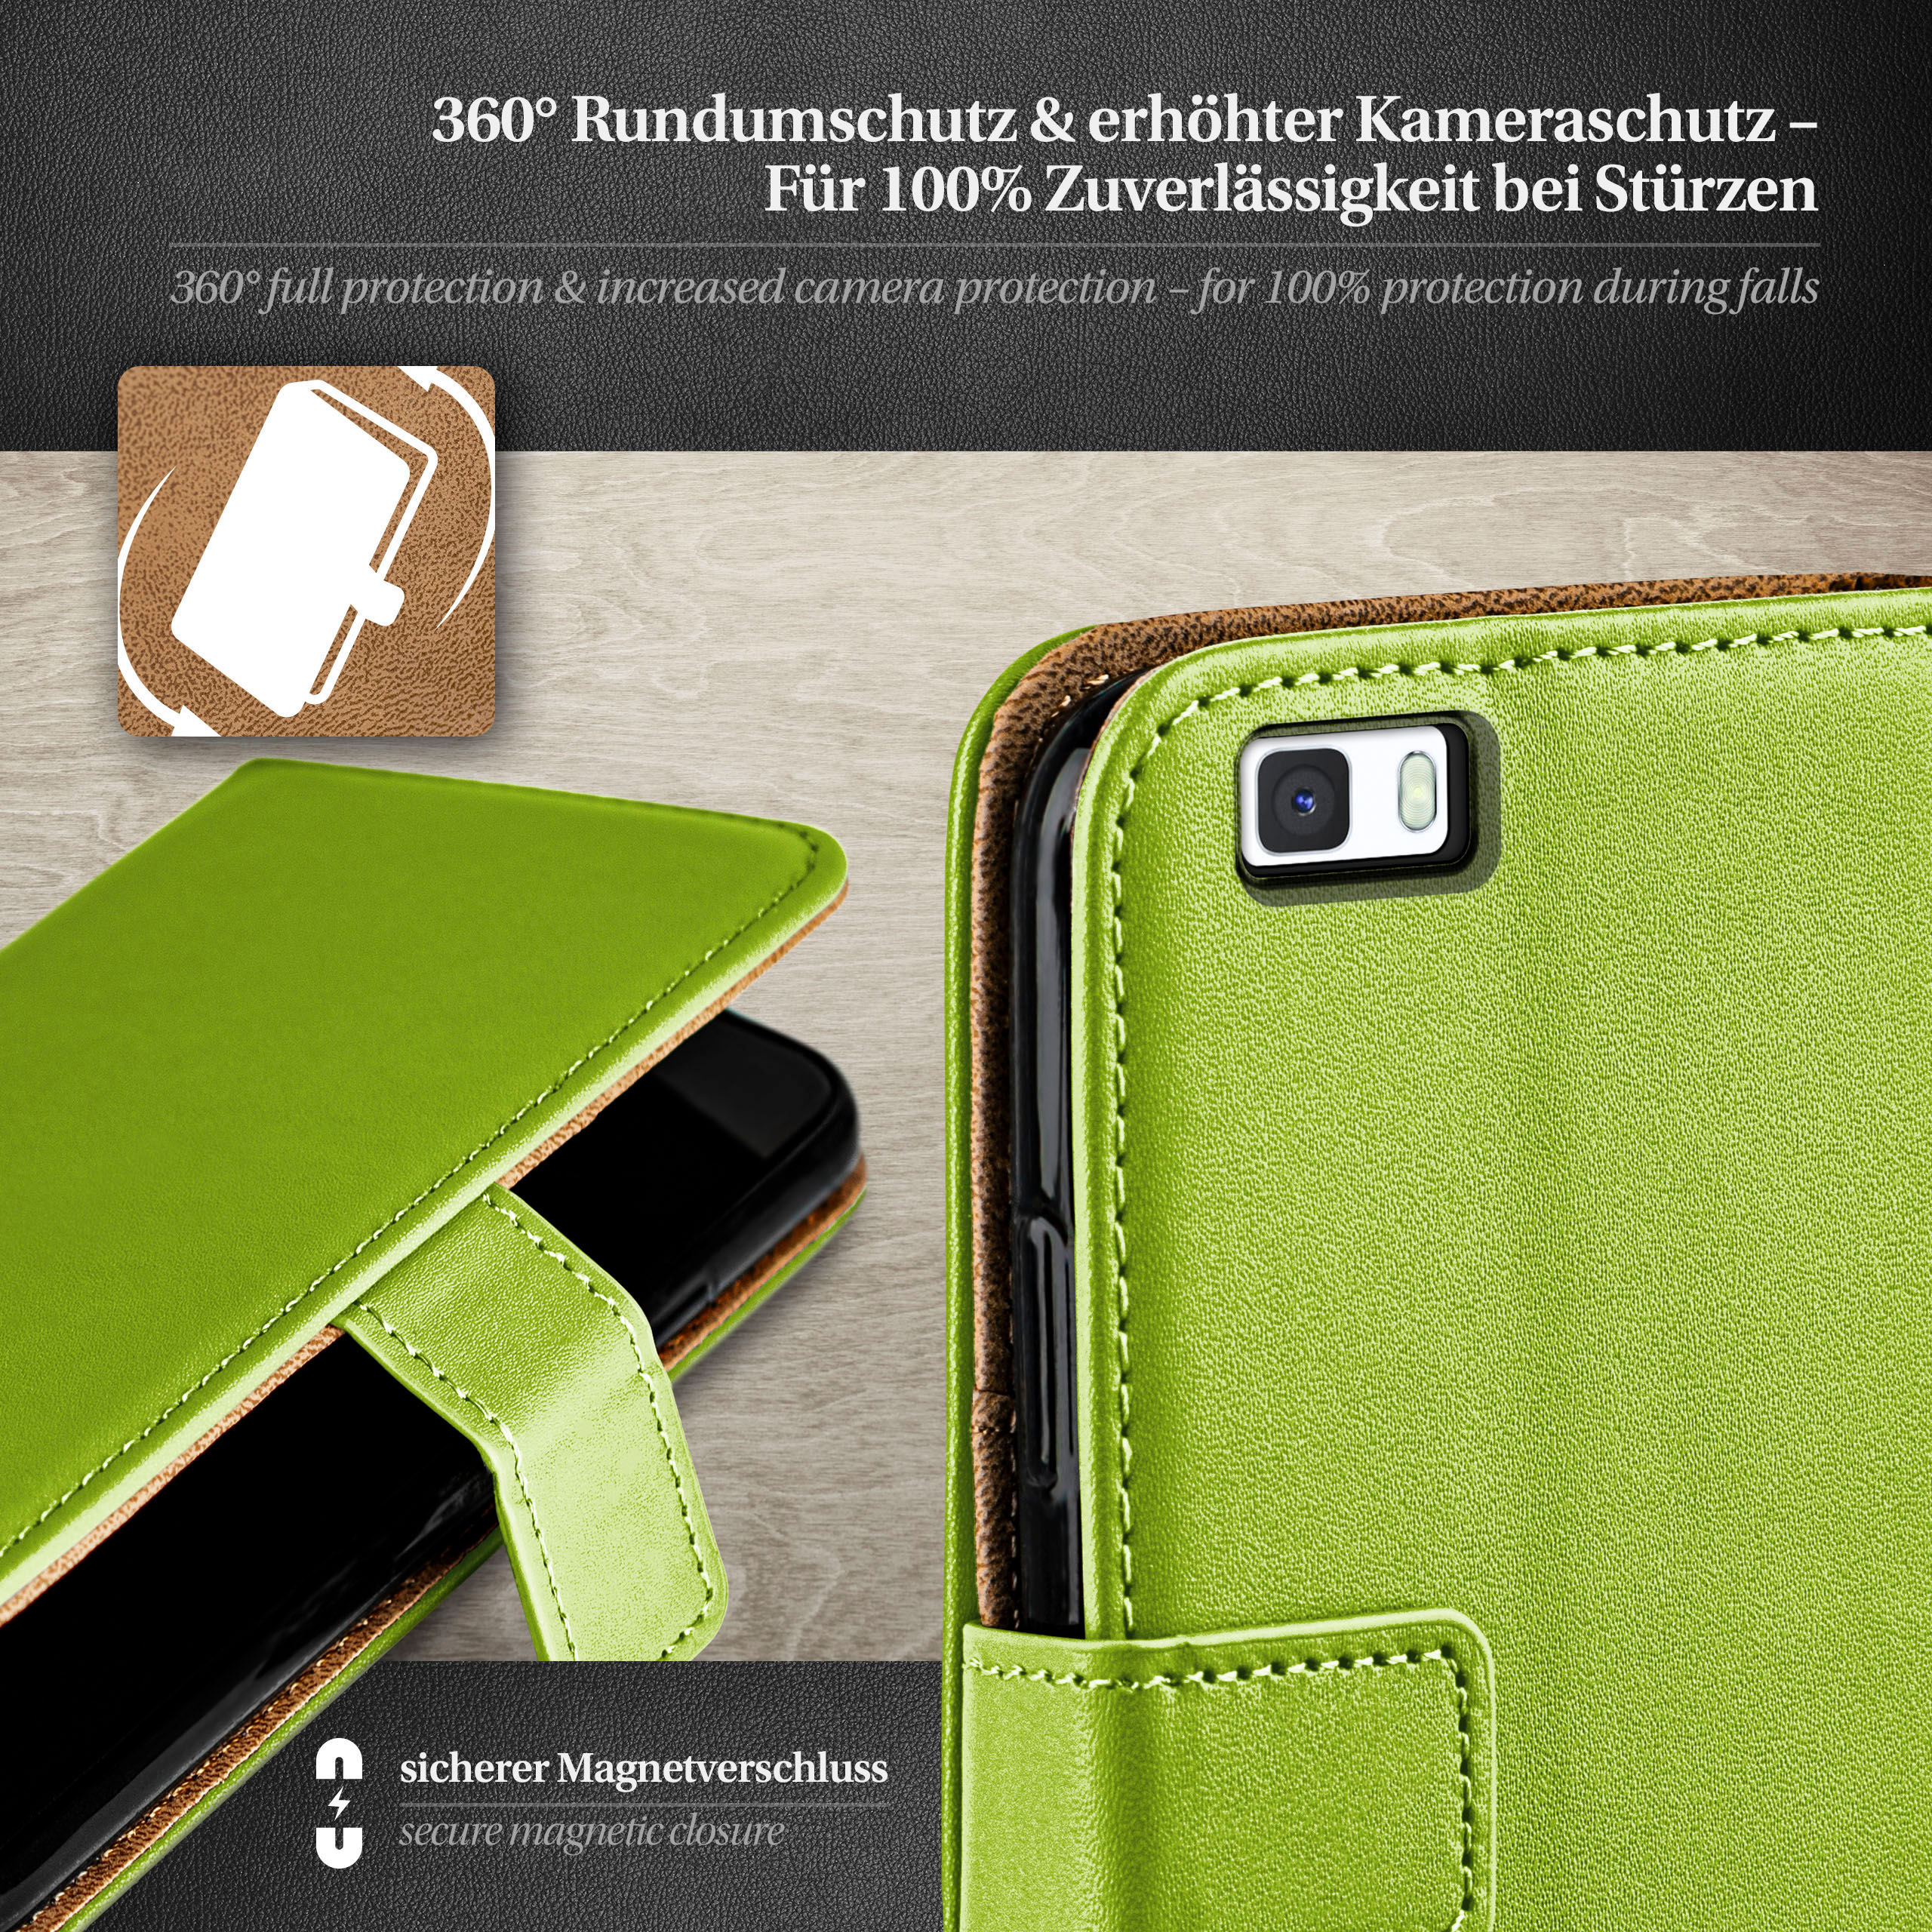 MOEX Book Case, 2015, Huawei, P8 Lime-Green Lite Bookcover